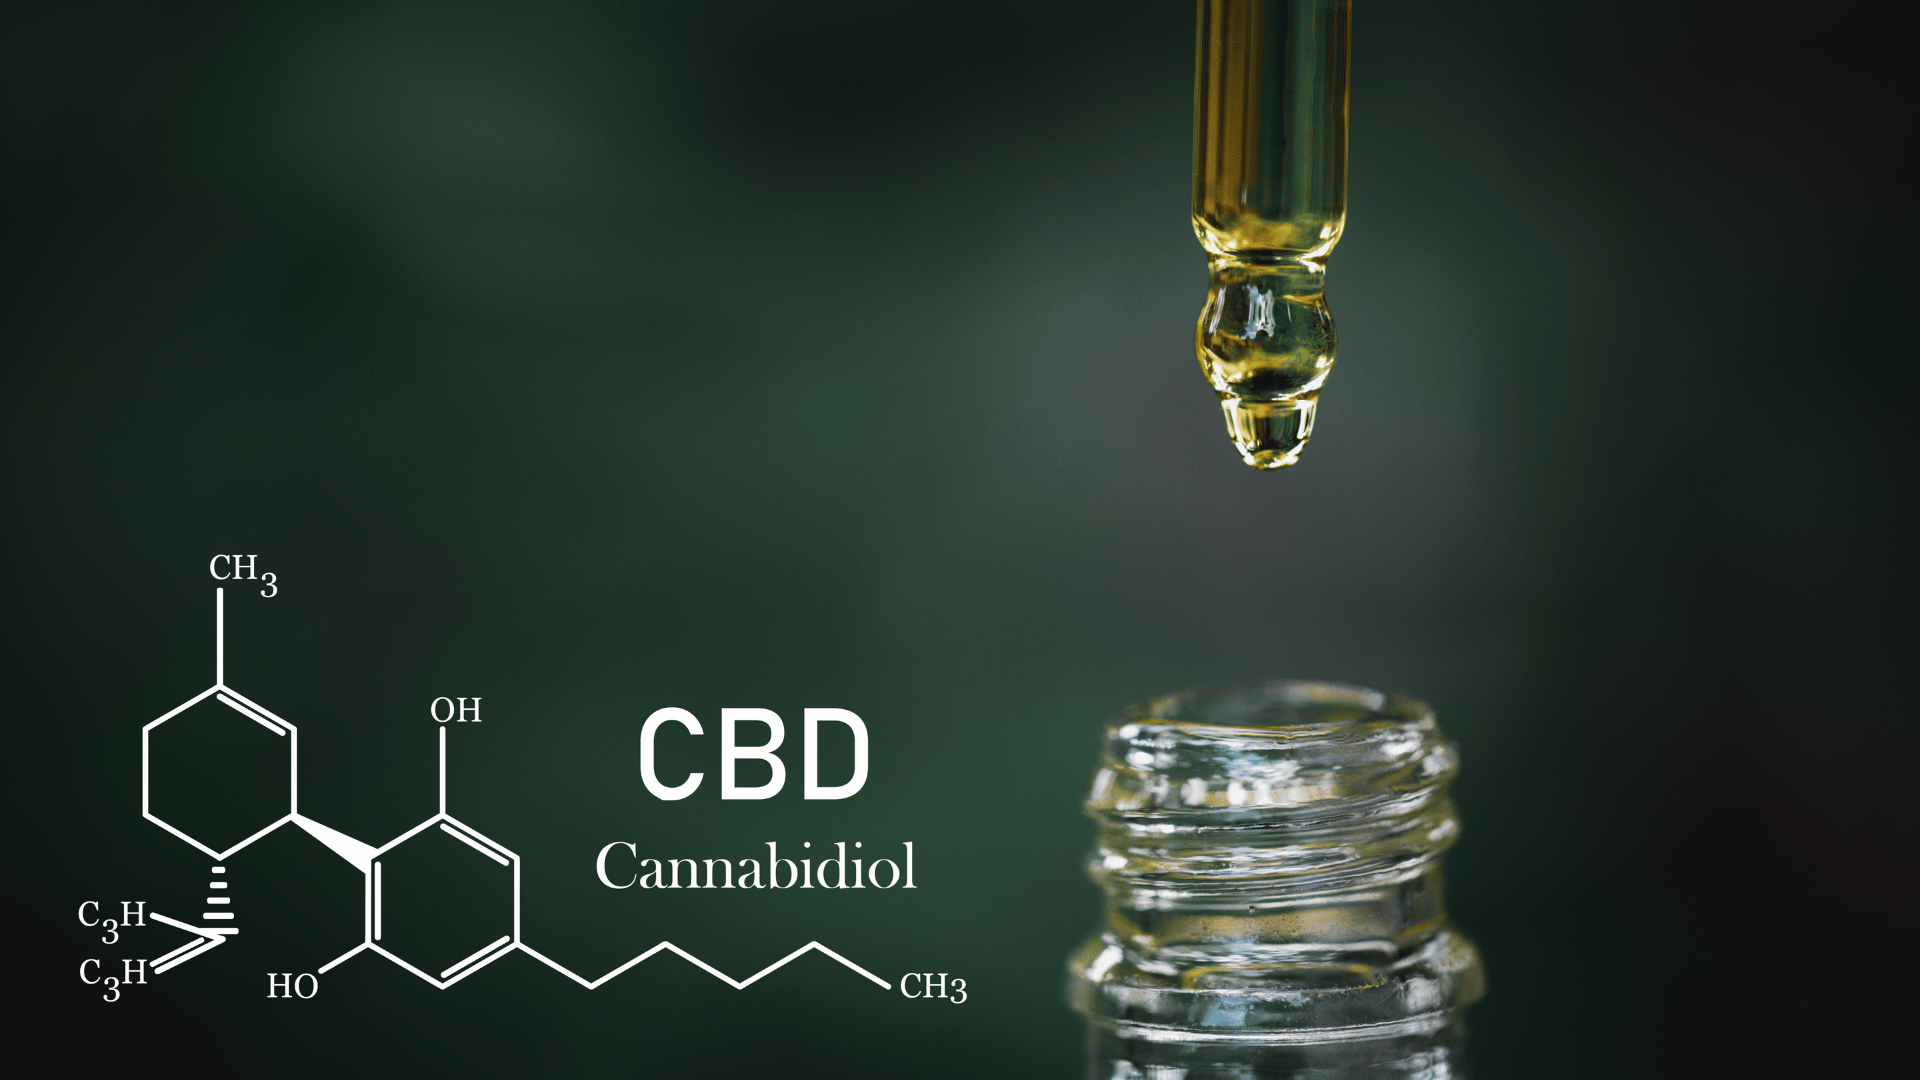 One less CBD: How does it compare to Other CBD Brands? A Comprehensive Review